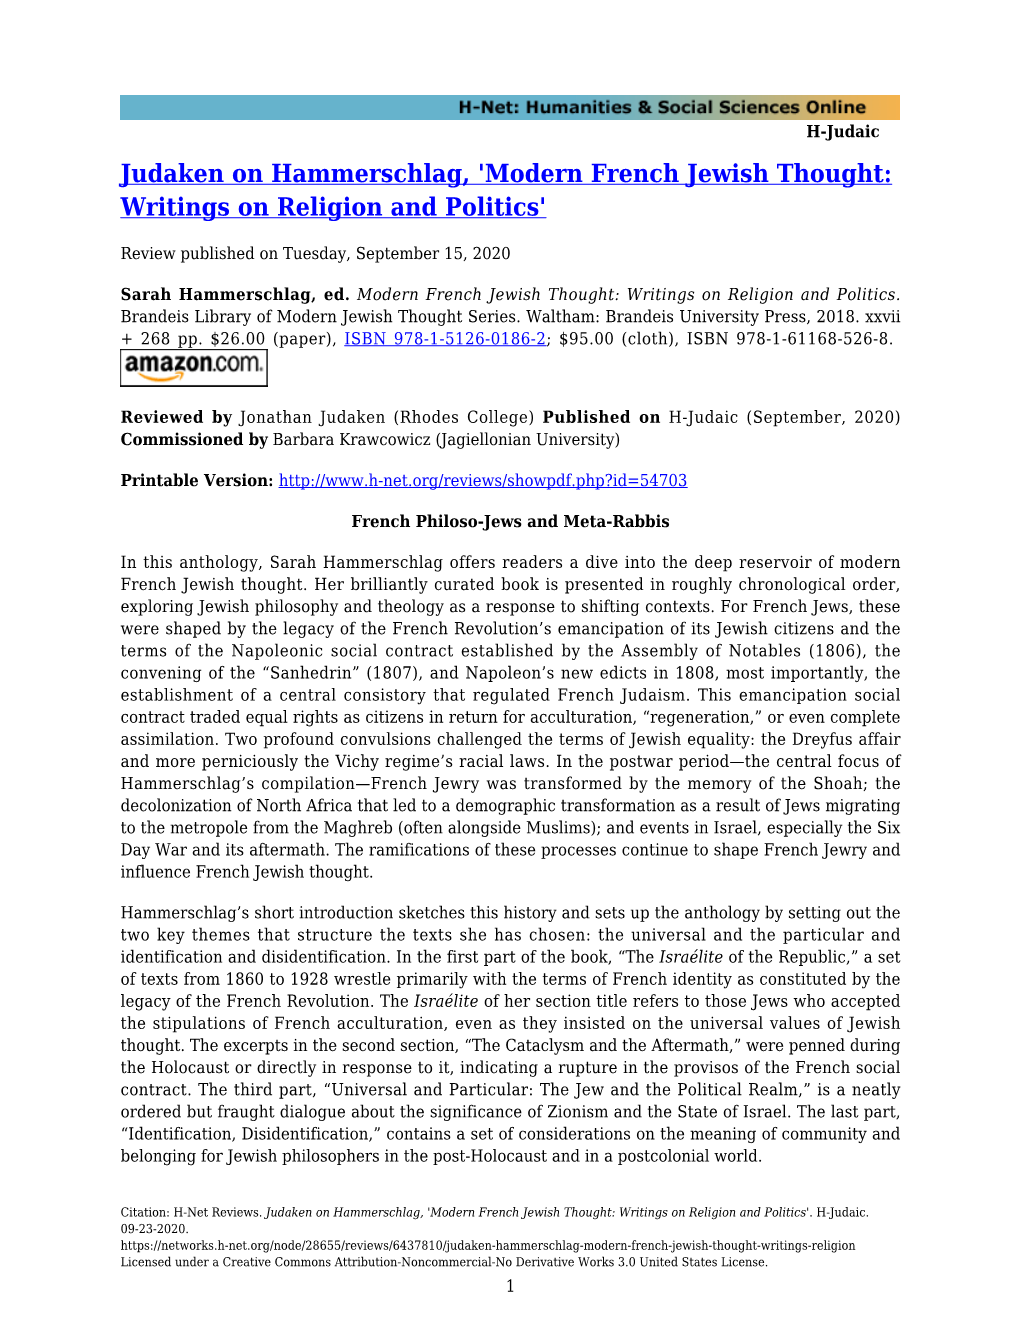 Modern French Jewish Thought: Writings on Religion and Politics'